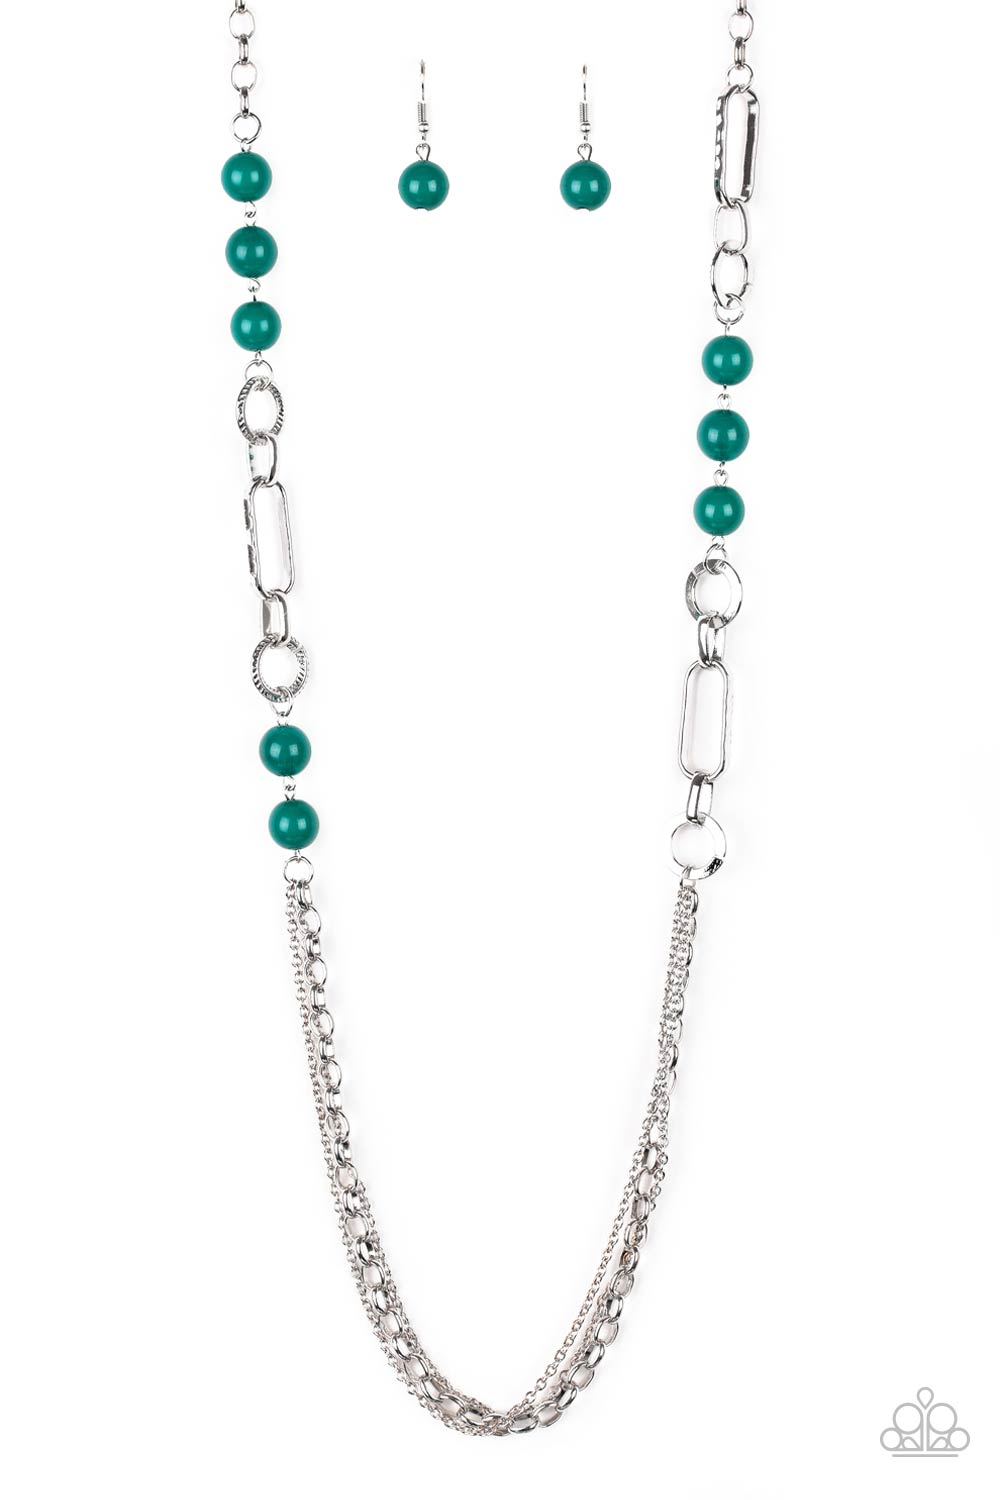 Necklace Set - CACHE Me Out - Green